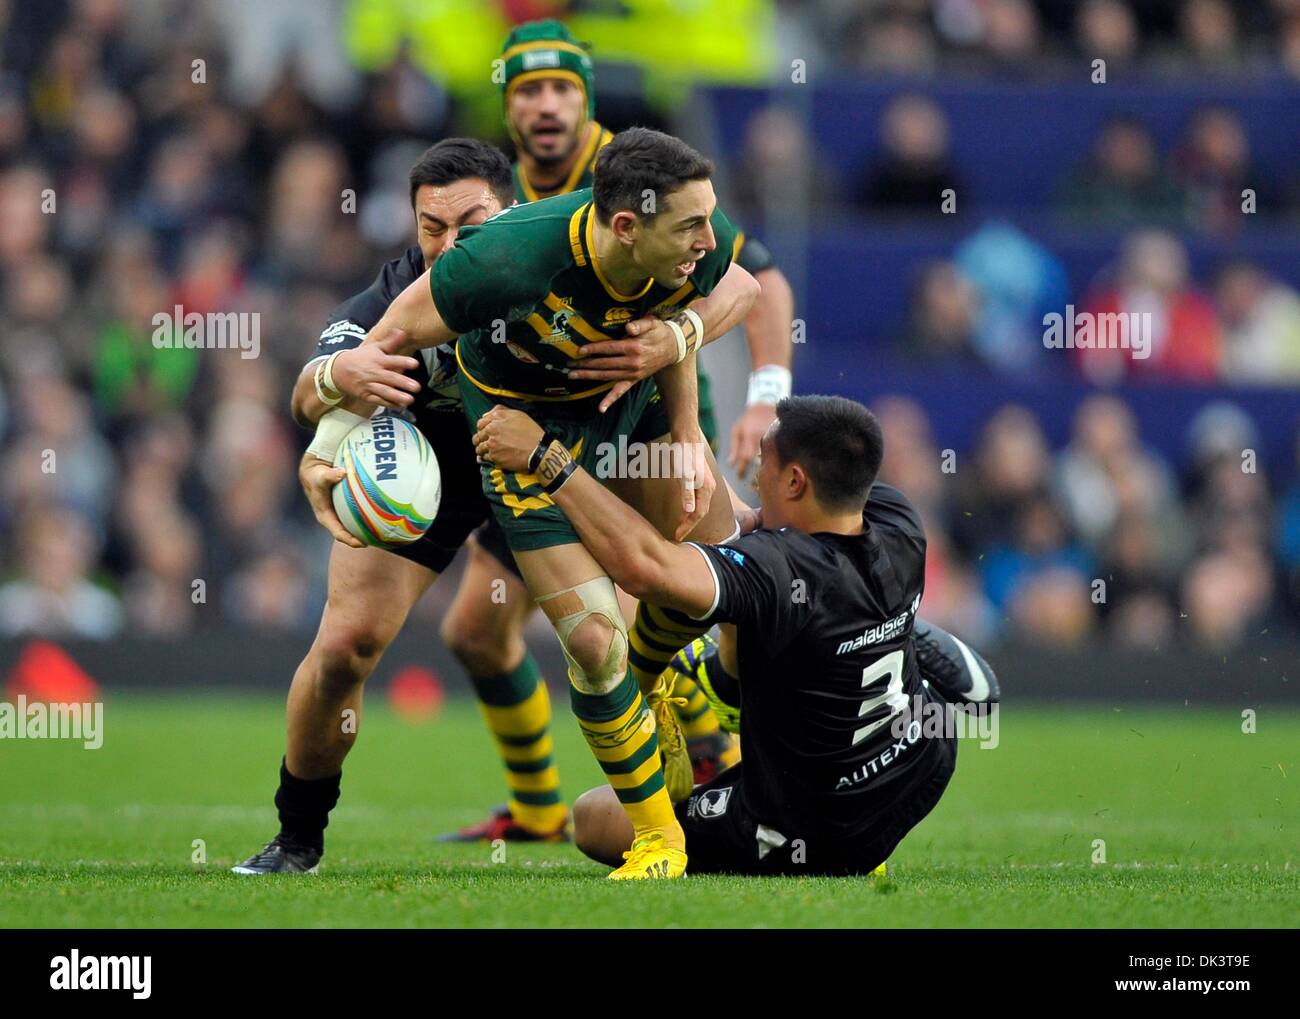 Manchester, UK. 1st Dec, 2013. Billy Slater (Australia) is tackled by Dean Whare (New Zealand, right) and Alex Glenn (New Zealand) - New Zealand v Australia - Rugby League World Cup Final - Old Trafford - Manchester - UK. Credit:  Sport In Pictures/Alamy Live News Stock Photo